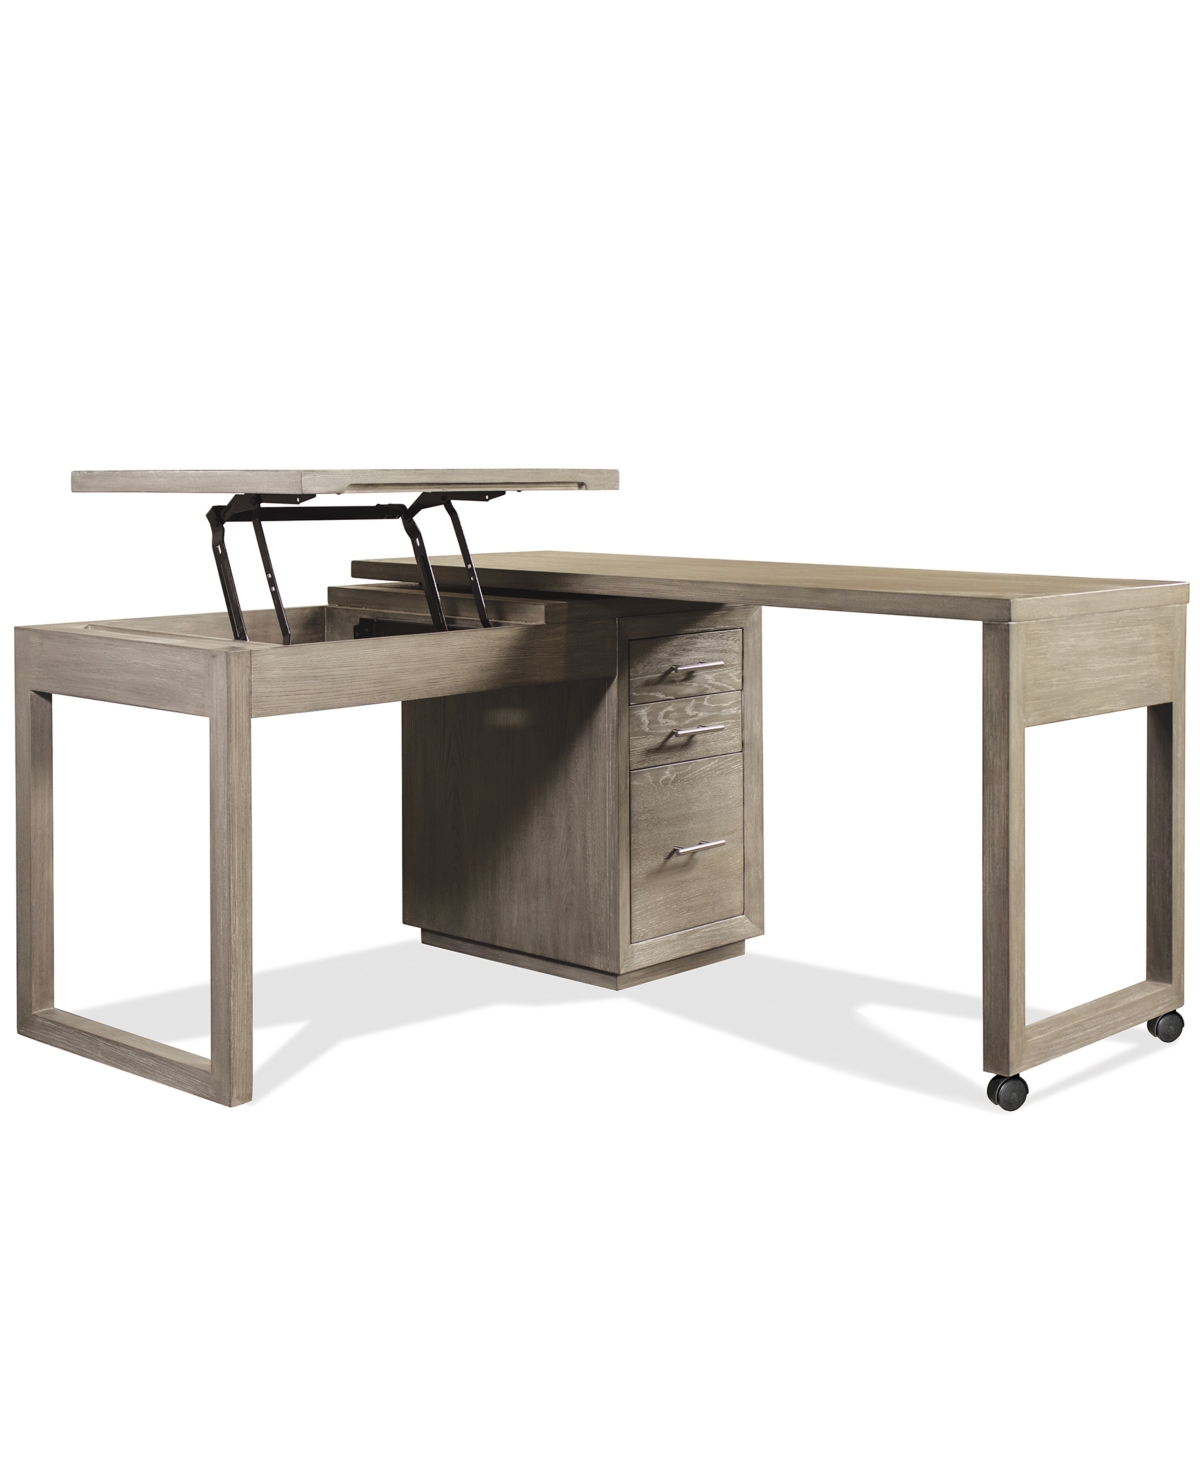 Furniture Prelude 56" Wood Swivel Lift Top L-shaped Desk In Causal Taupe